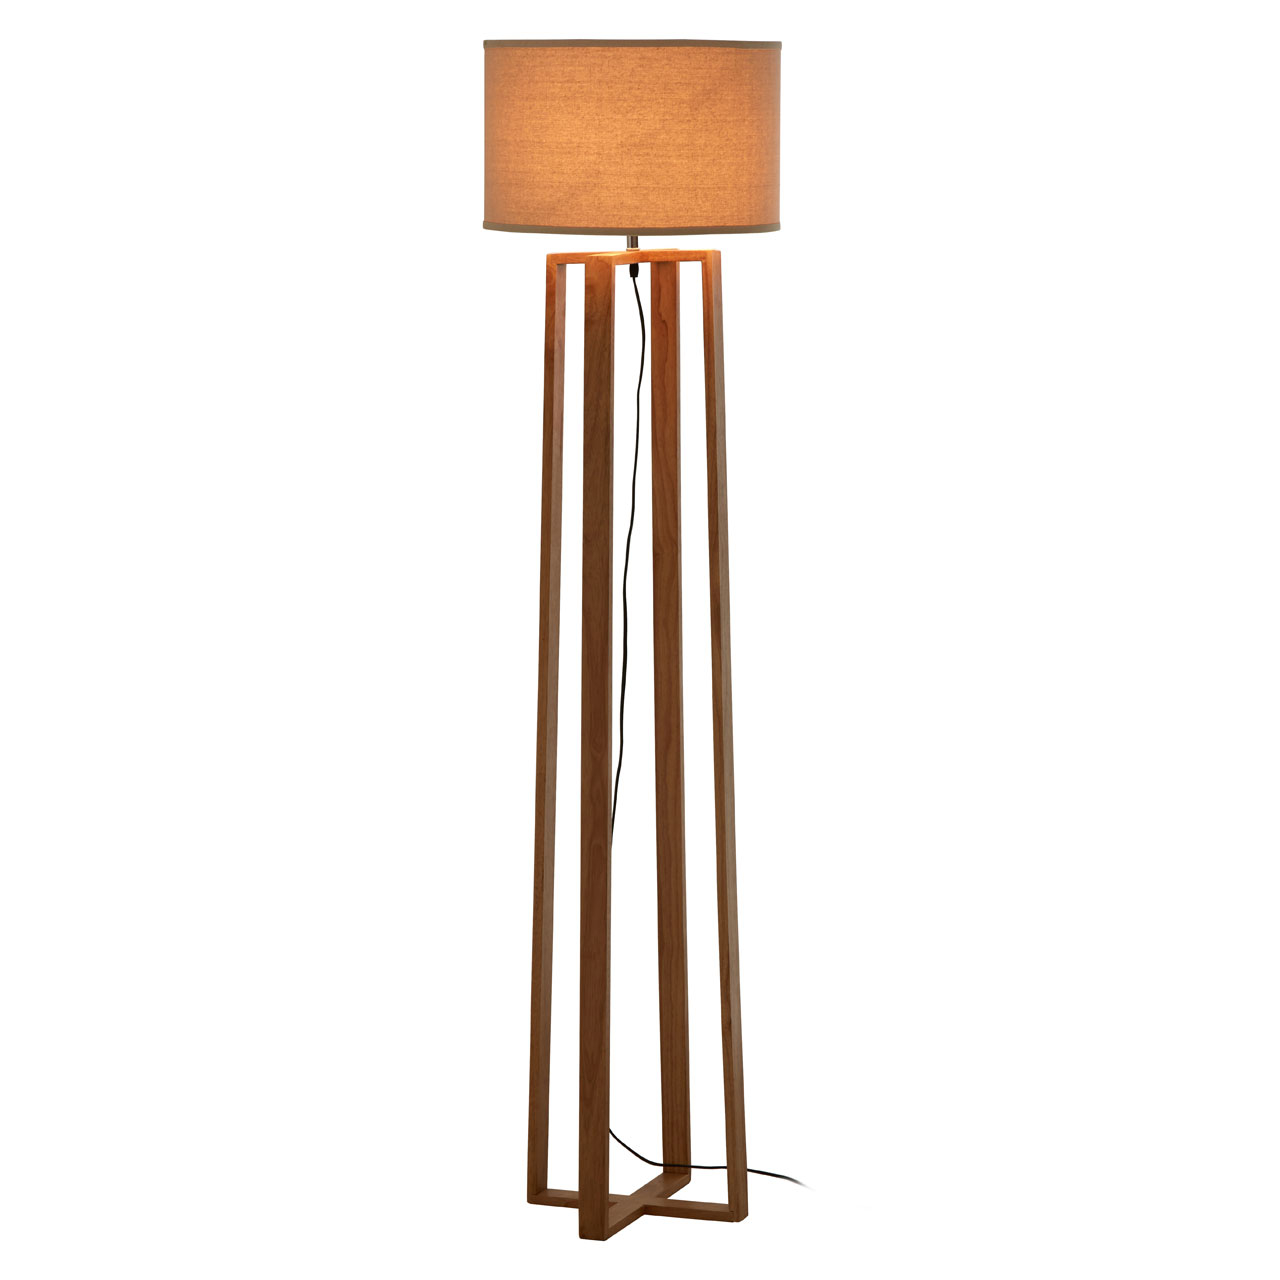 Details About Lea Wooden Floor Standard Standing Lamp Brown Fabric Shade regarding sizing 1280 X 1280